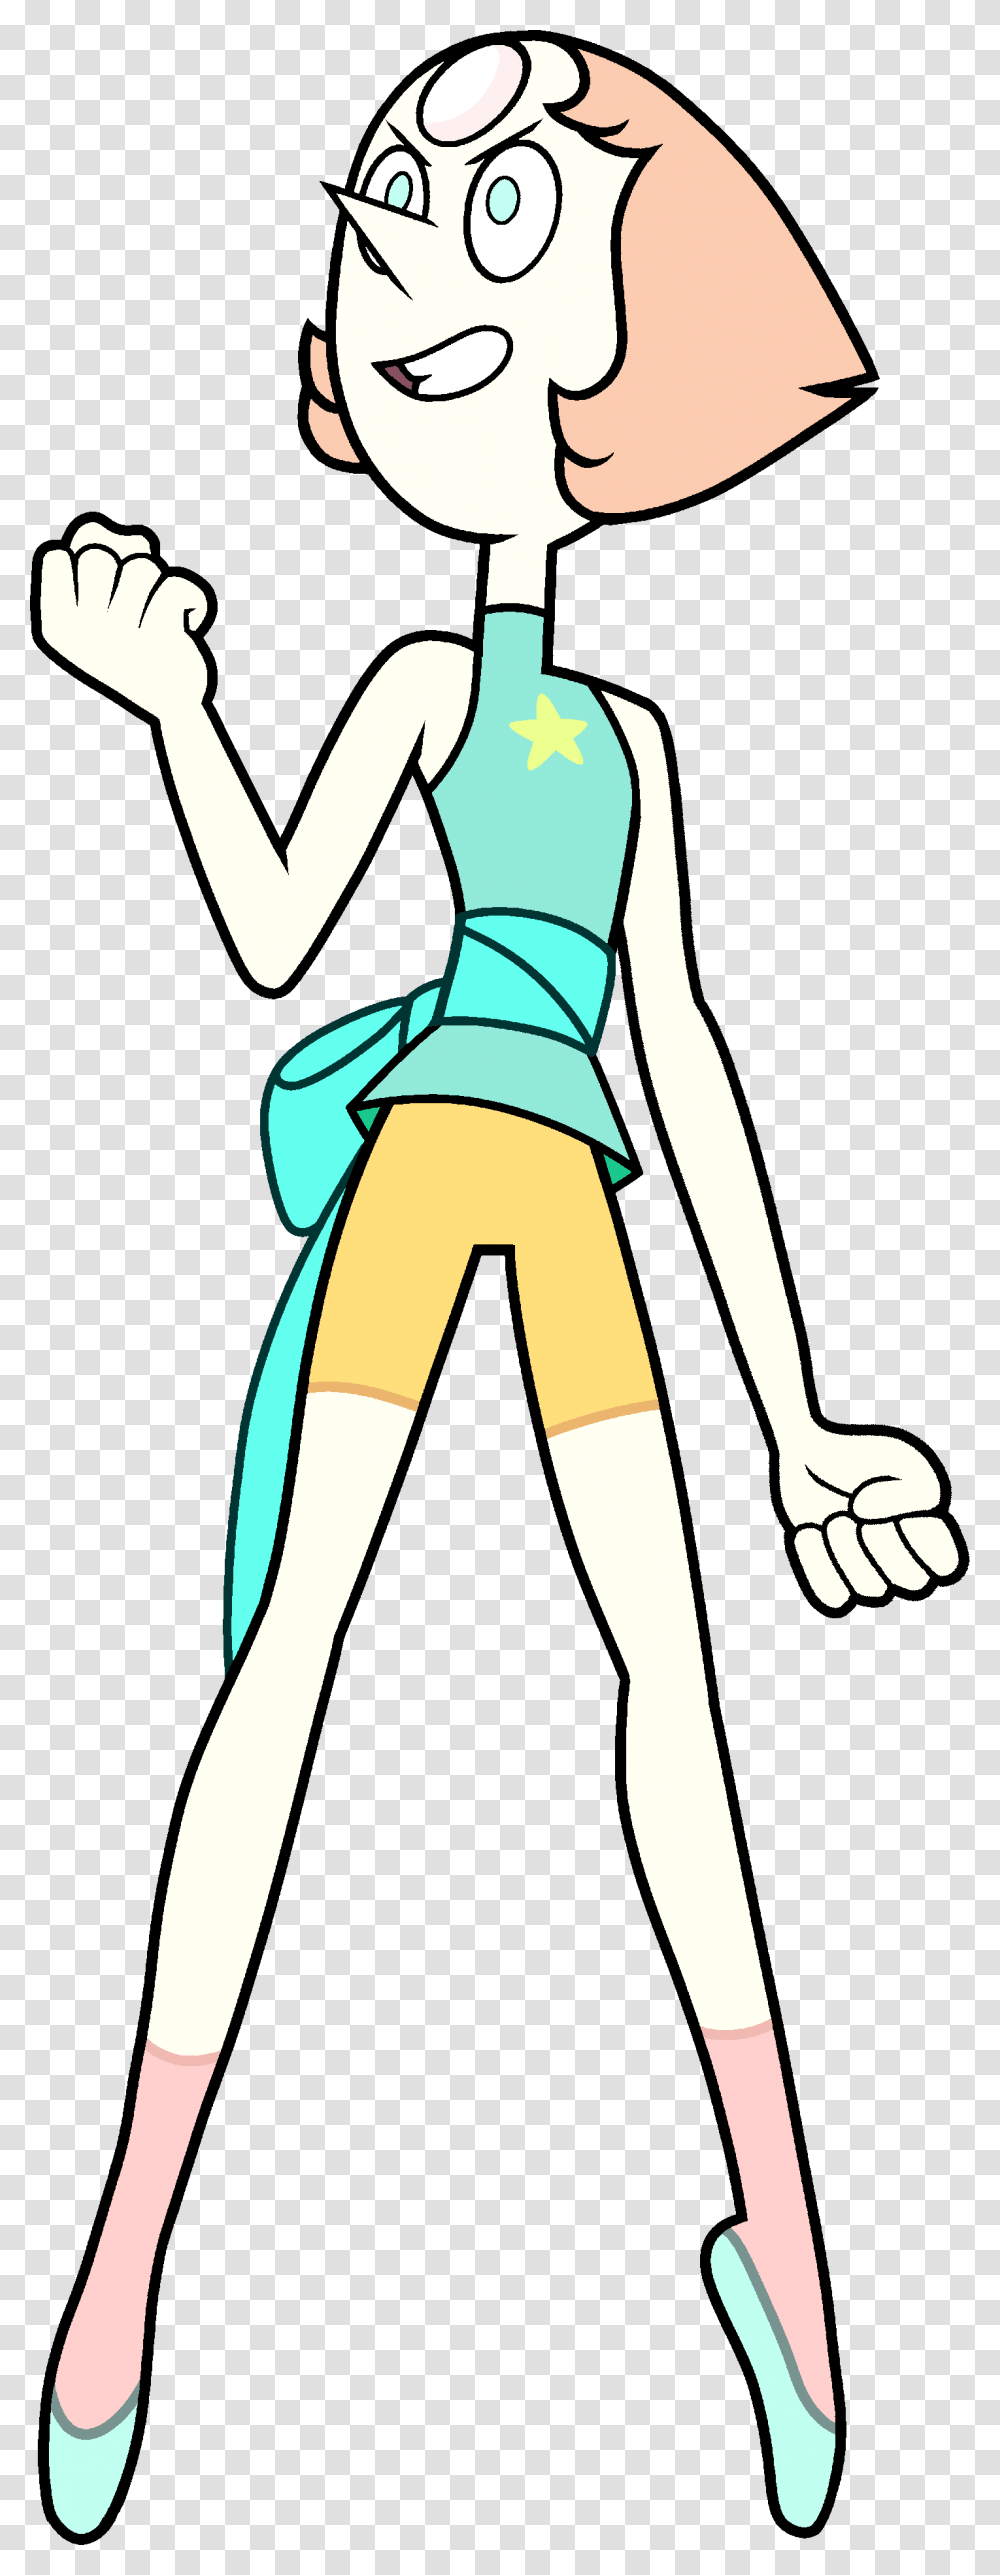 Image Result For Pearl Steven Universe Steven Universe Characters Pearl, Hand, Person, Holding Hands Transparent Png